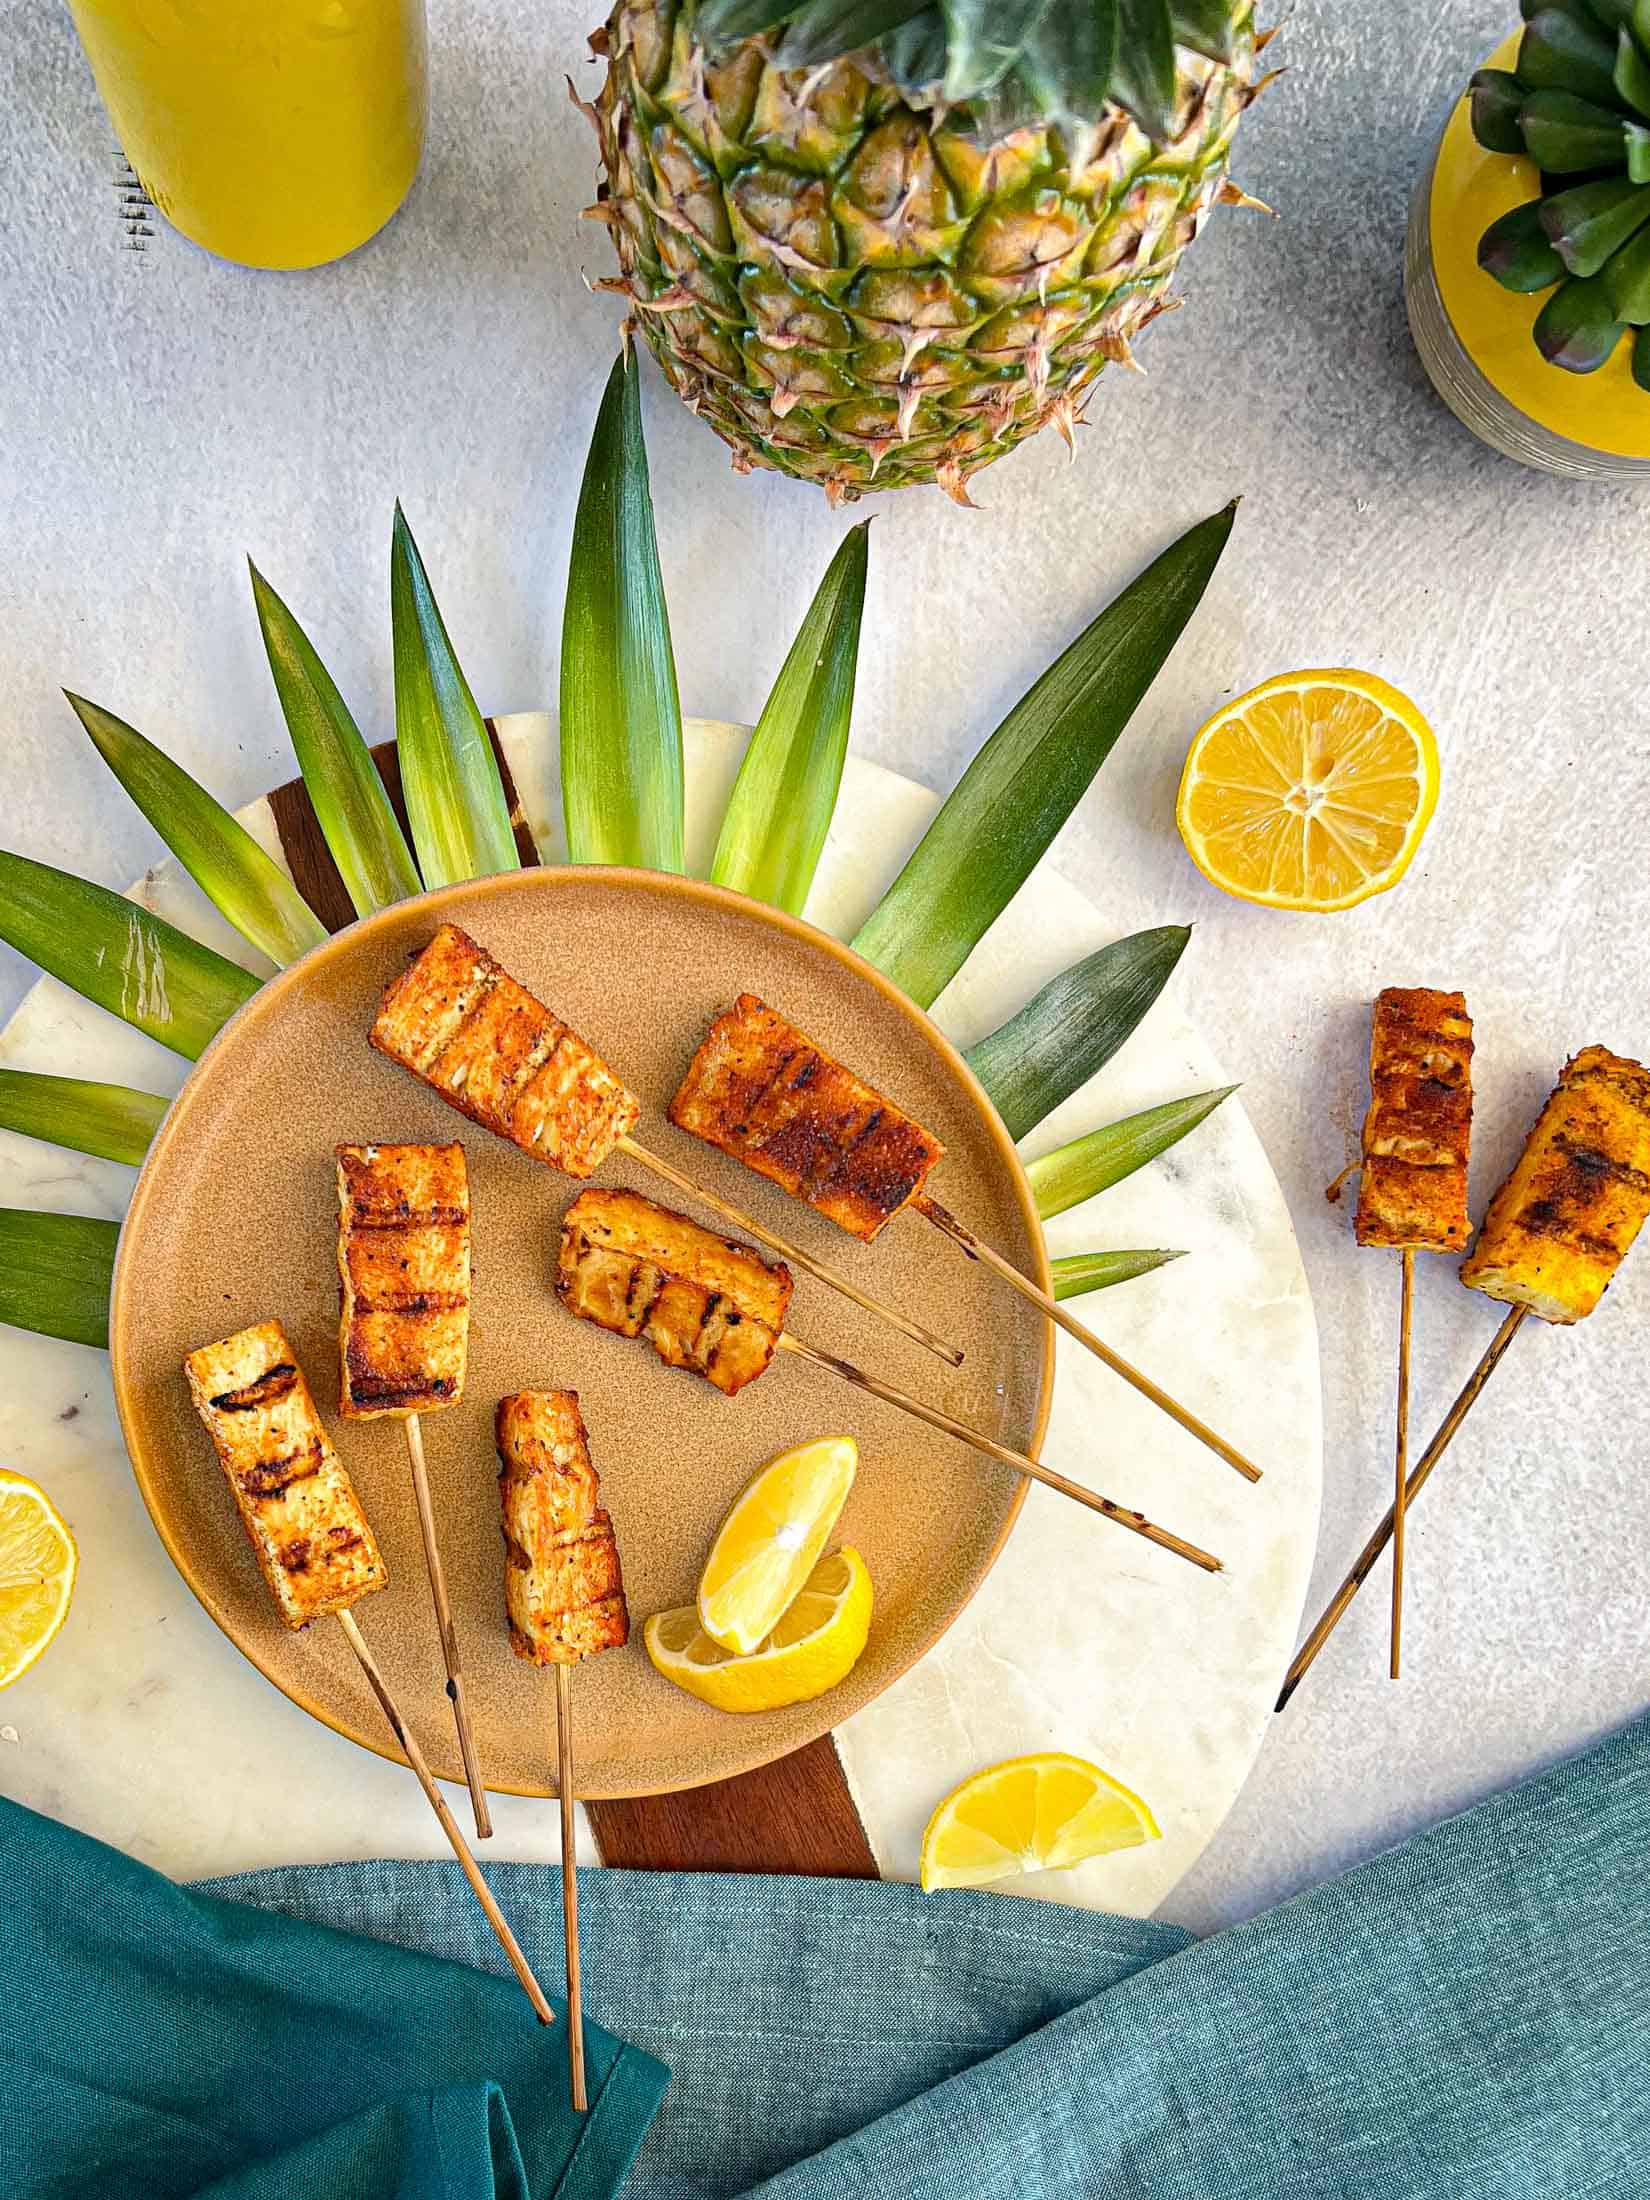 Smoked pineapple on wooden skewers with pineapple leaves and sliced lemons.